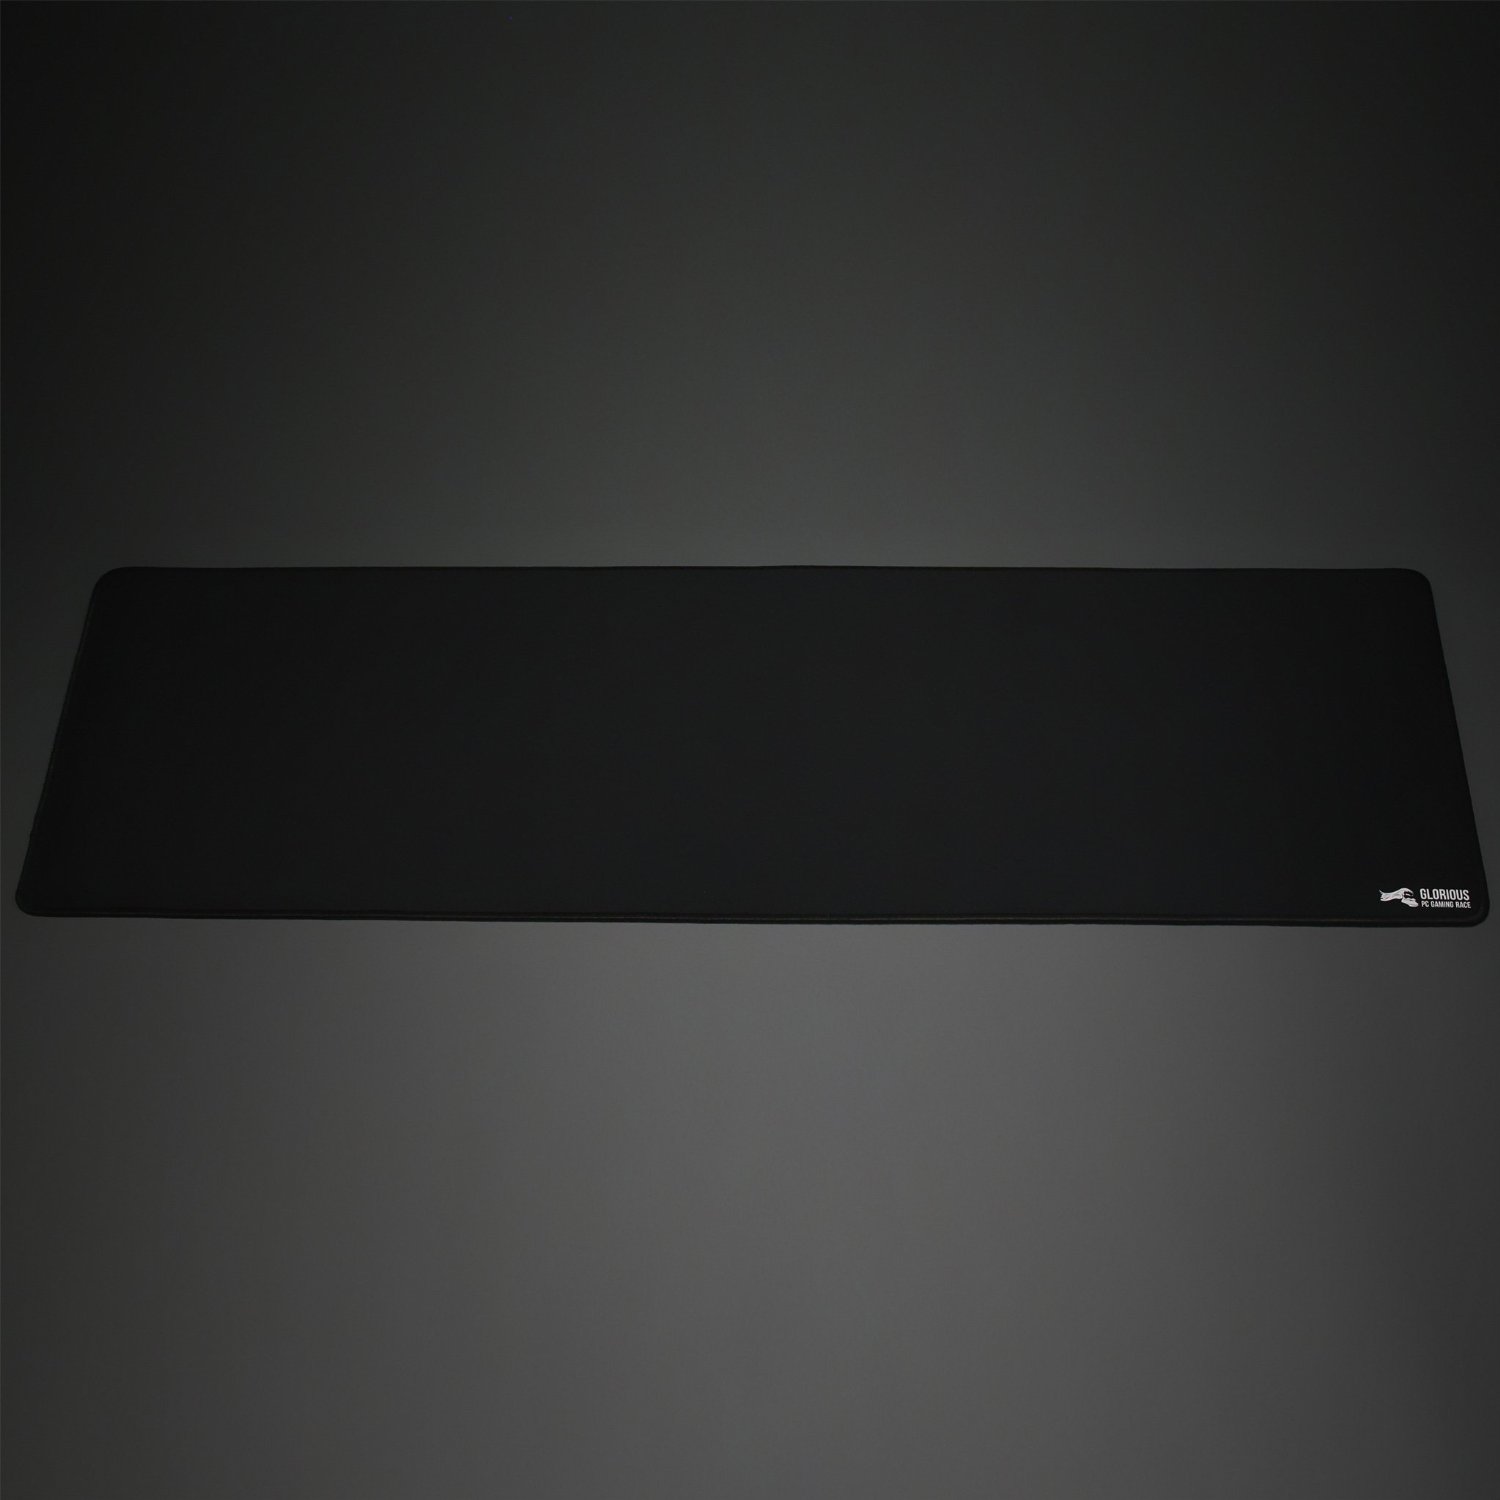 Glorious - Glorious G-E Extended Full Desk Pro Gaming Surface - Black 914x279x3mm